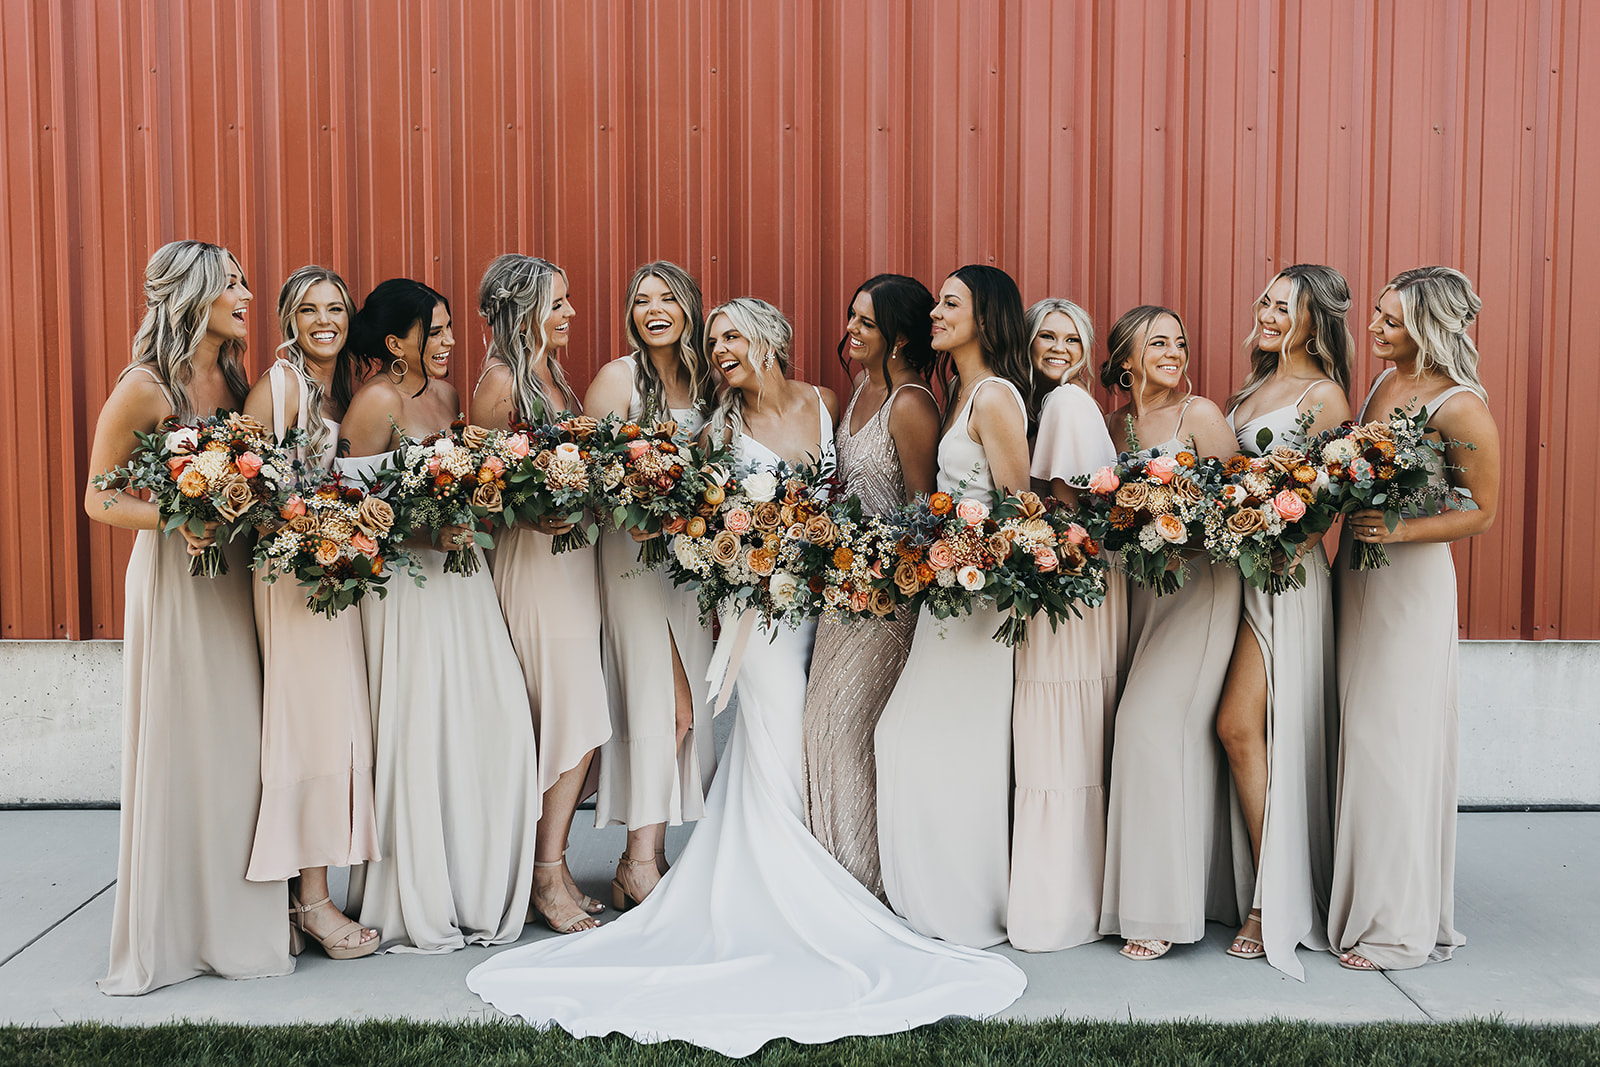 Bride and bridesmaids share a laugh for photos before the wedding at Copper Wine Company winery